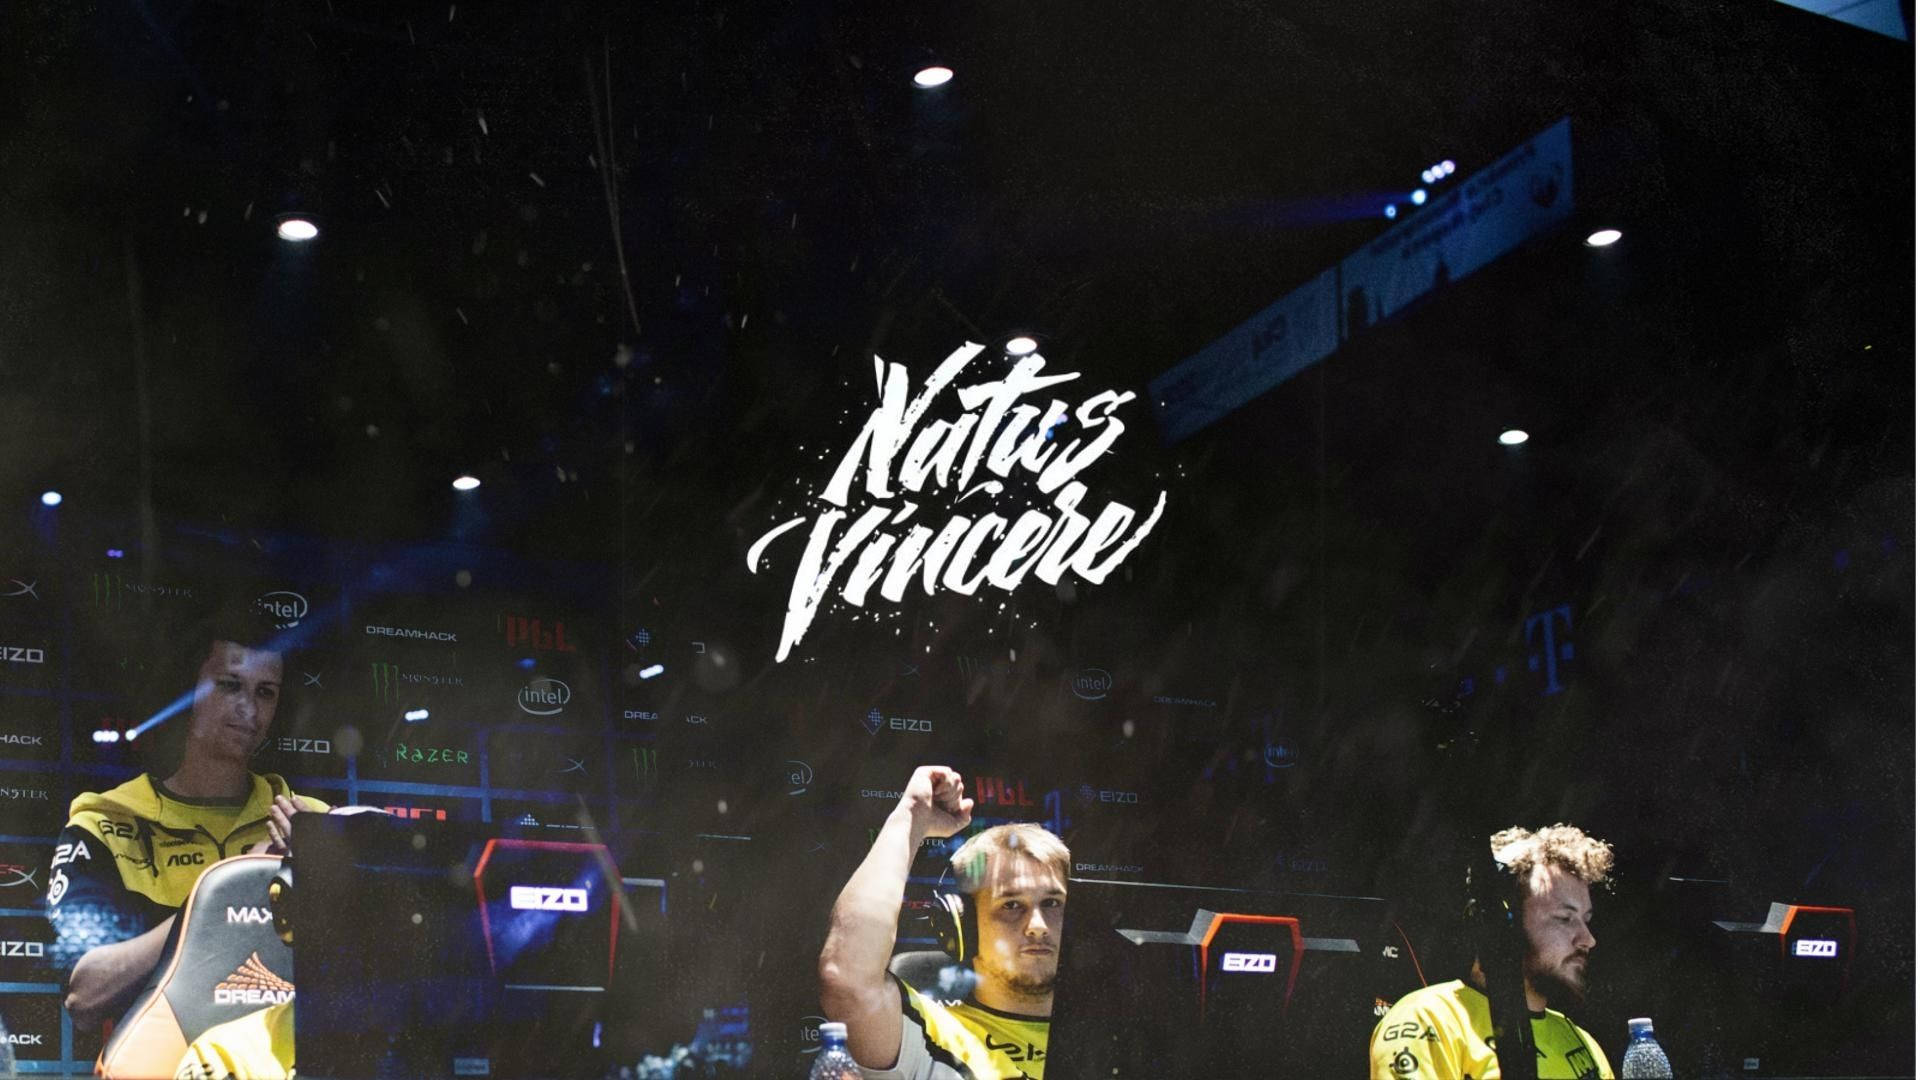 In Game Natus Vincere